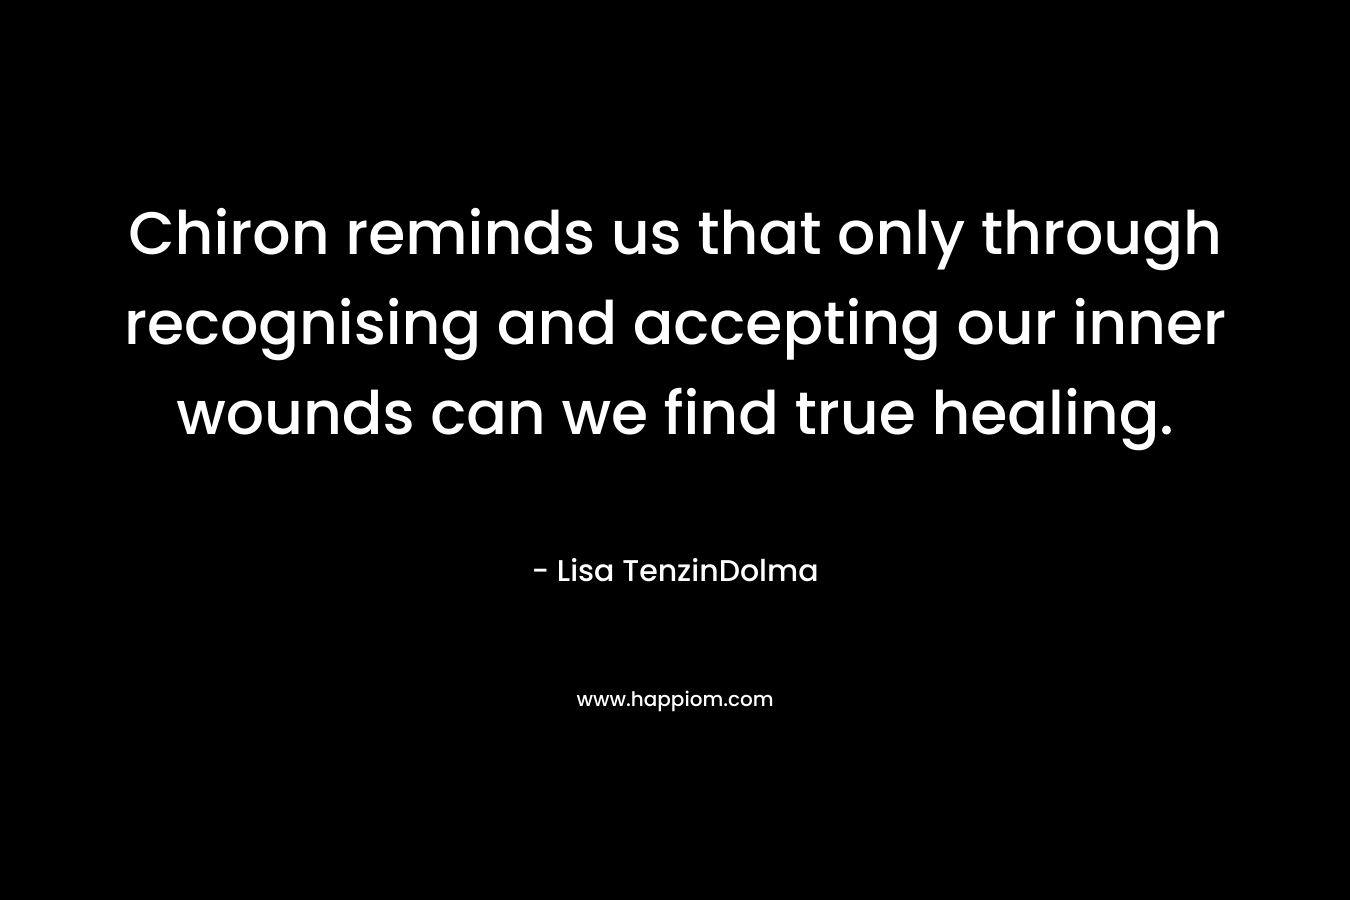 Chiron reminds us that only through recognising and accepting our inner wounds can we find true healing.